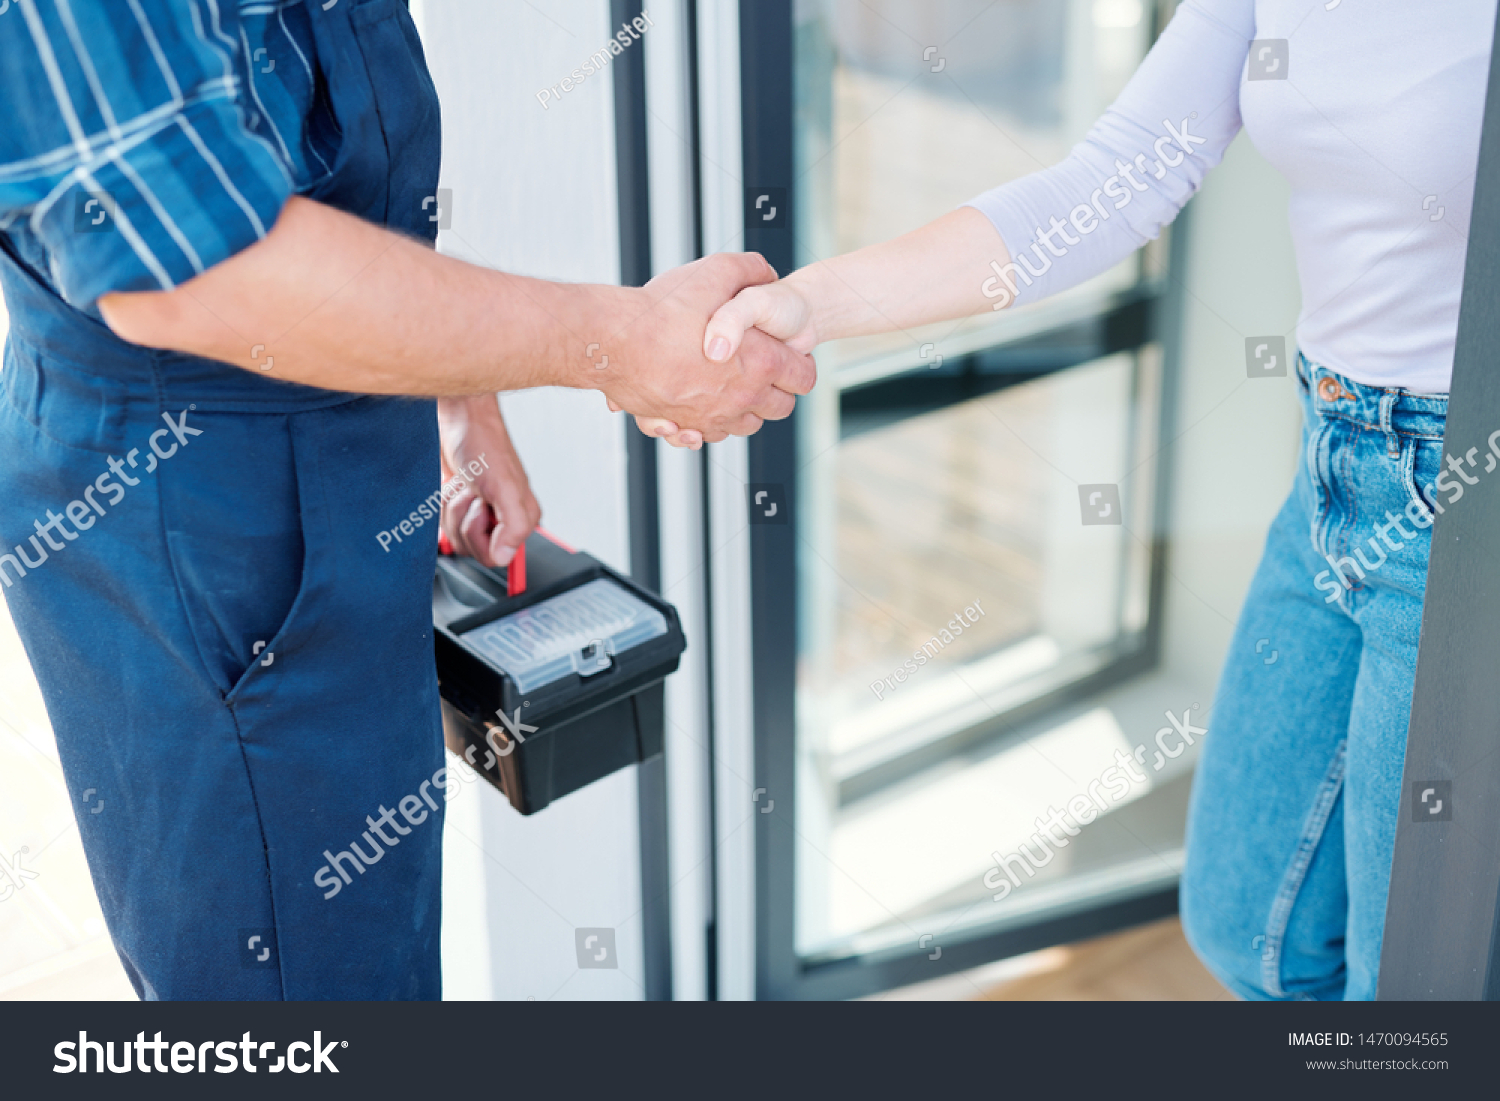 Young woman and technician saying goodbye while shaking hands after repair work #1470094565